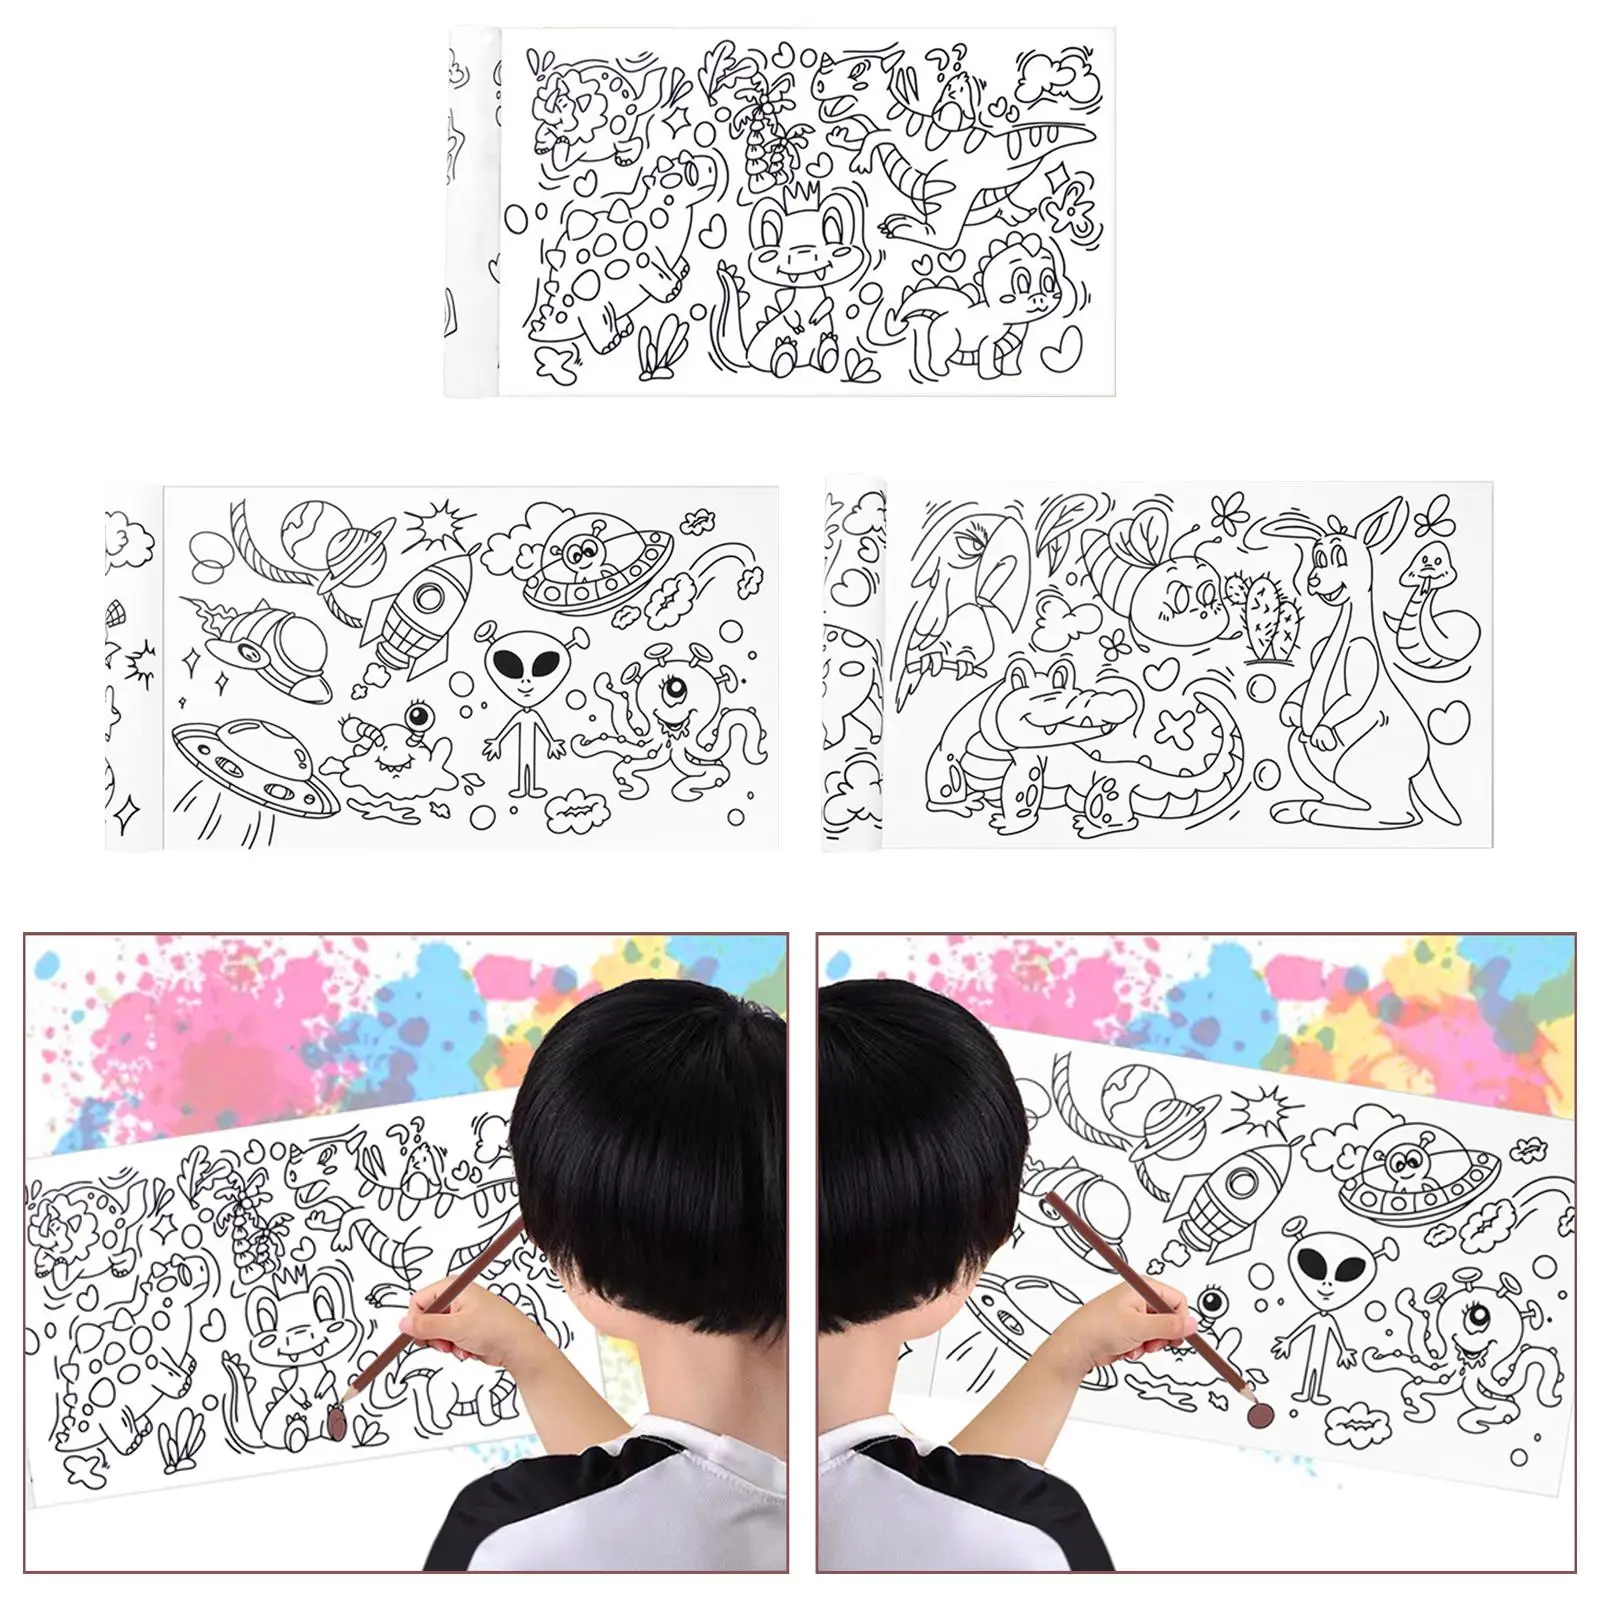 Children Coloring Roll Table Wall Coloring Sheets Coloring Poster Arts Crafts Activity Educational Toy Large Color Filling Paper